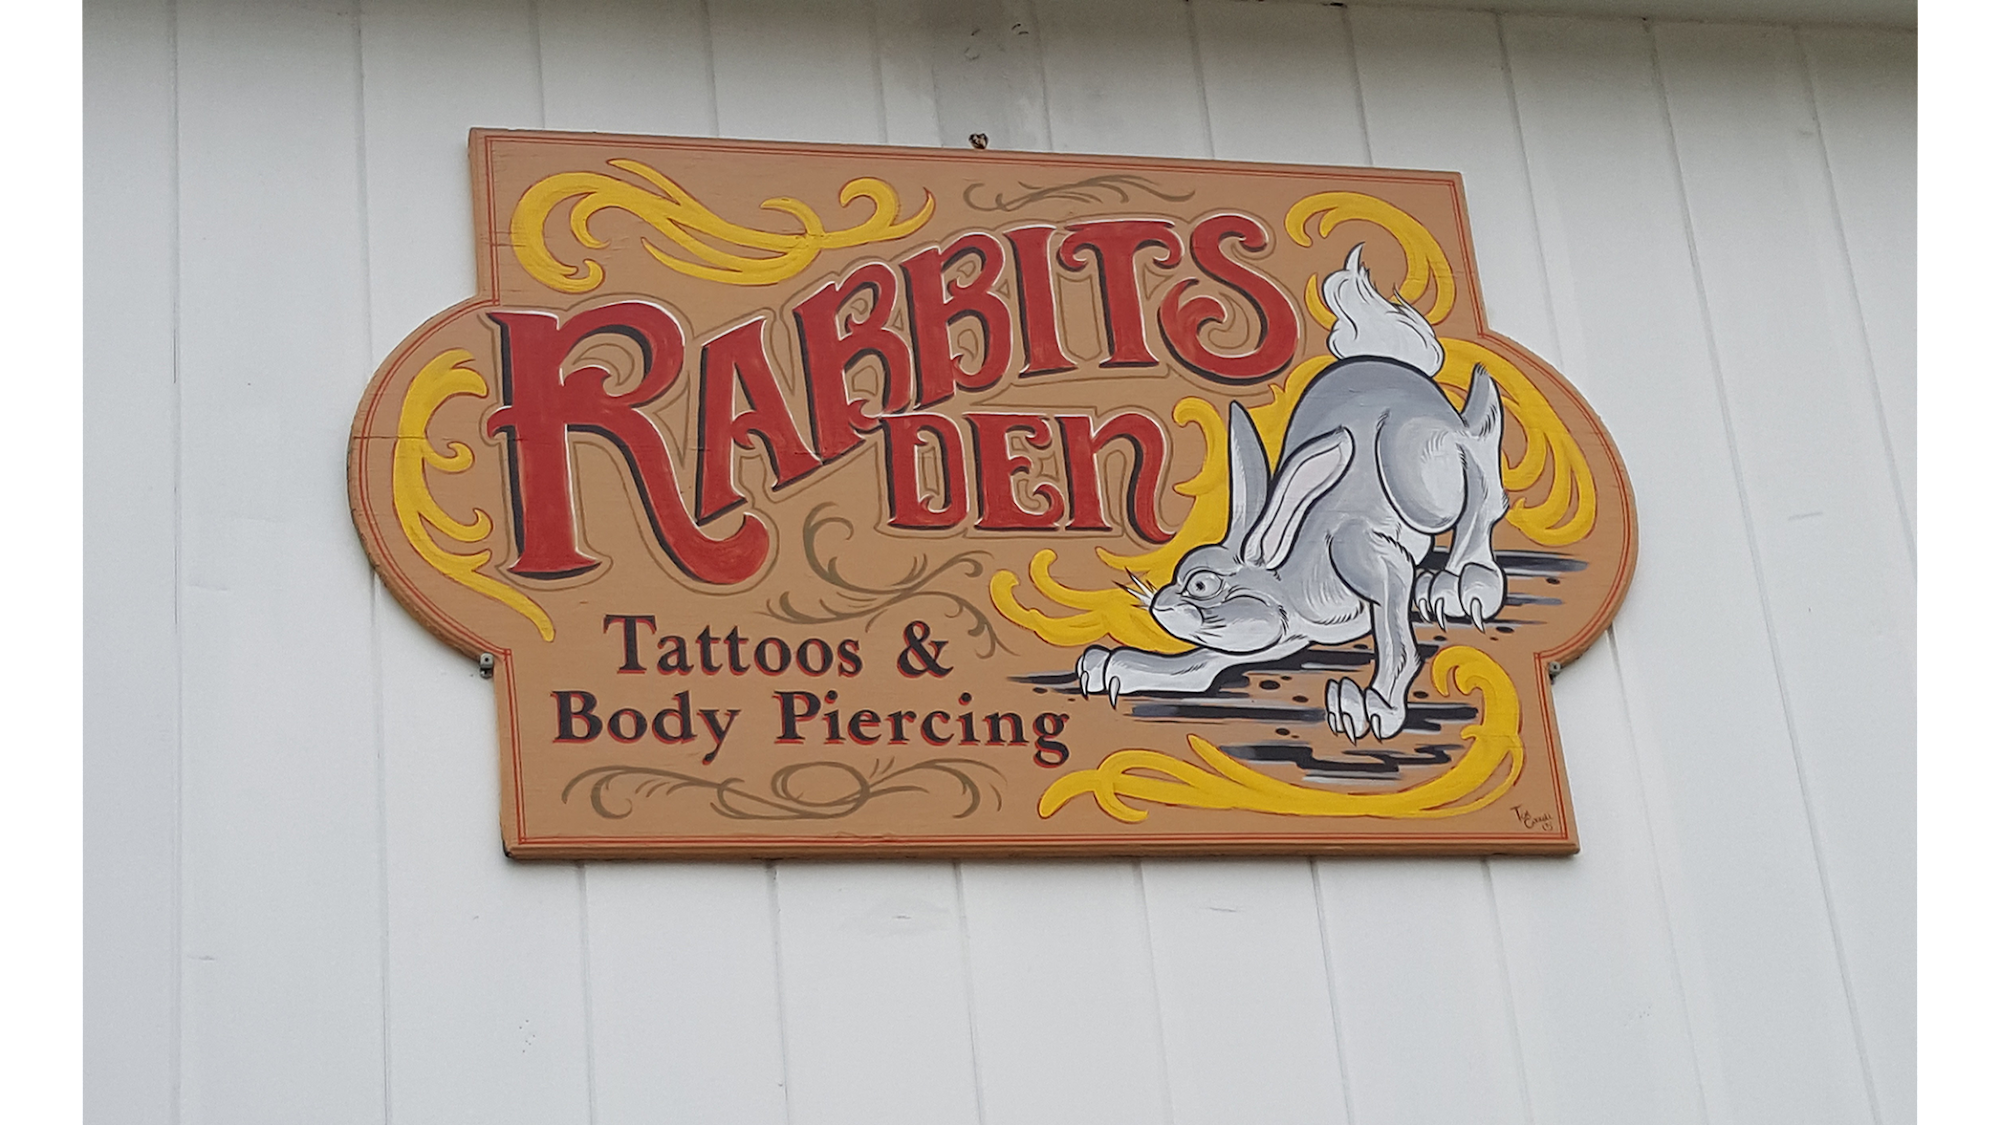 Rabbits Den Tattoo and Piercing Parlor 120 N Main St Suite #201, Milltown New Jersey 08850